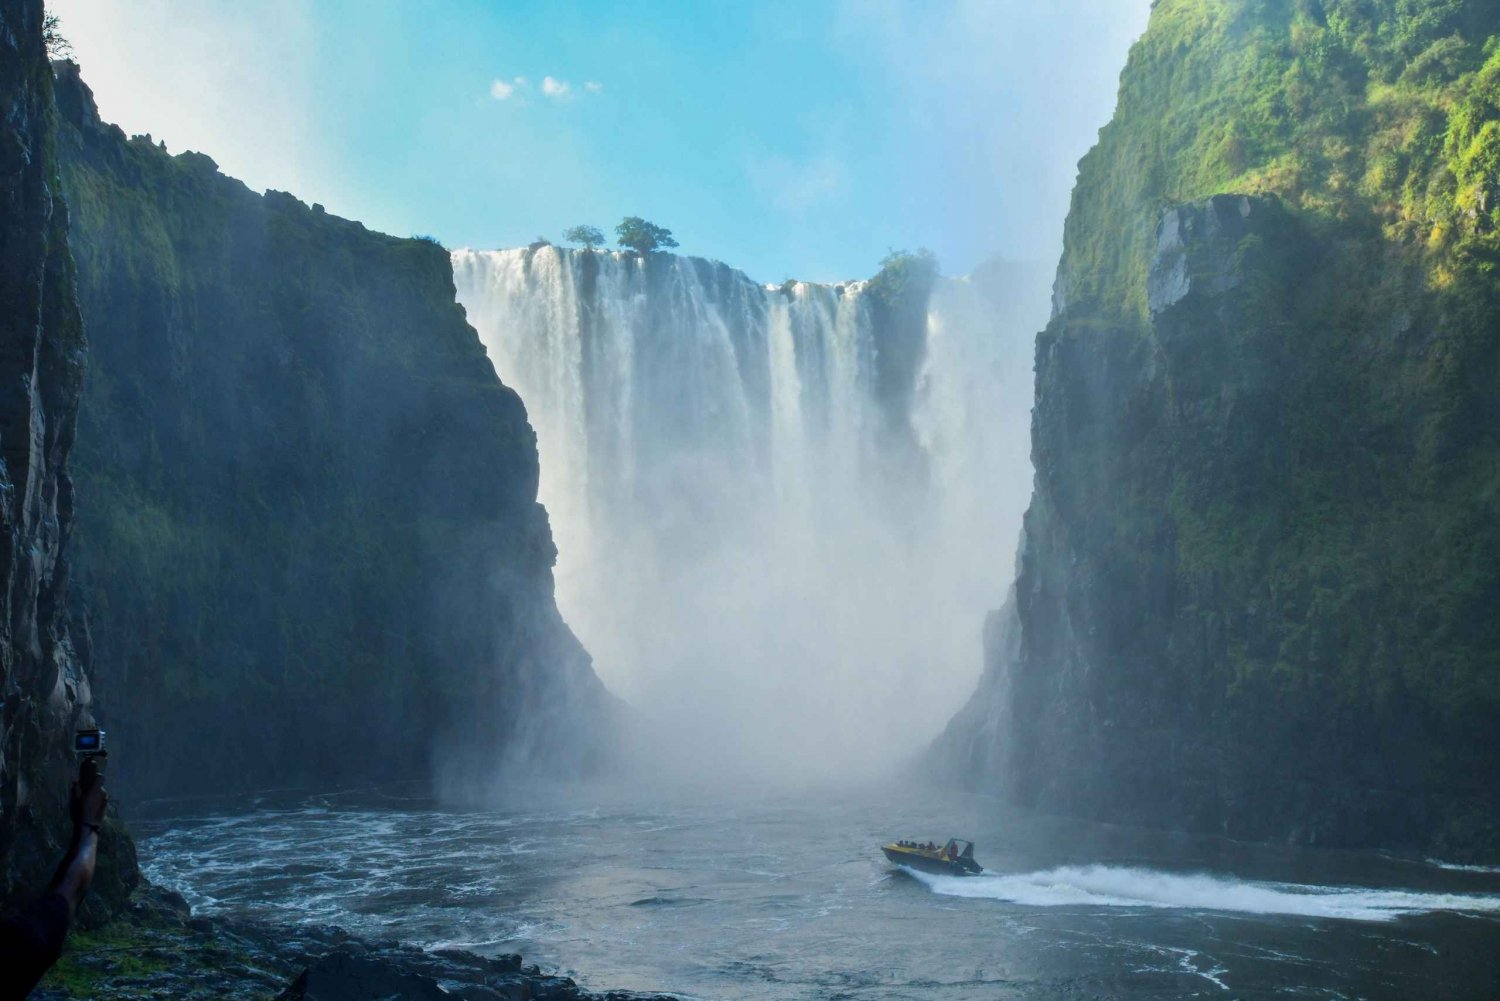 Thrilling jet boat adventure at the base of Victoria Falls